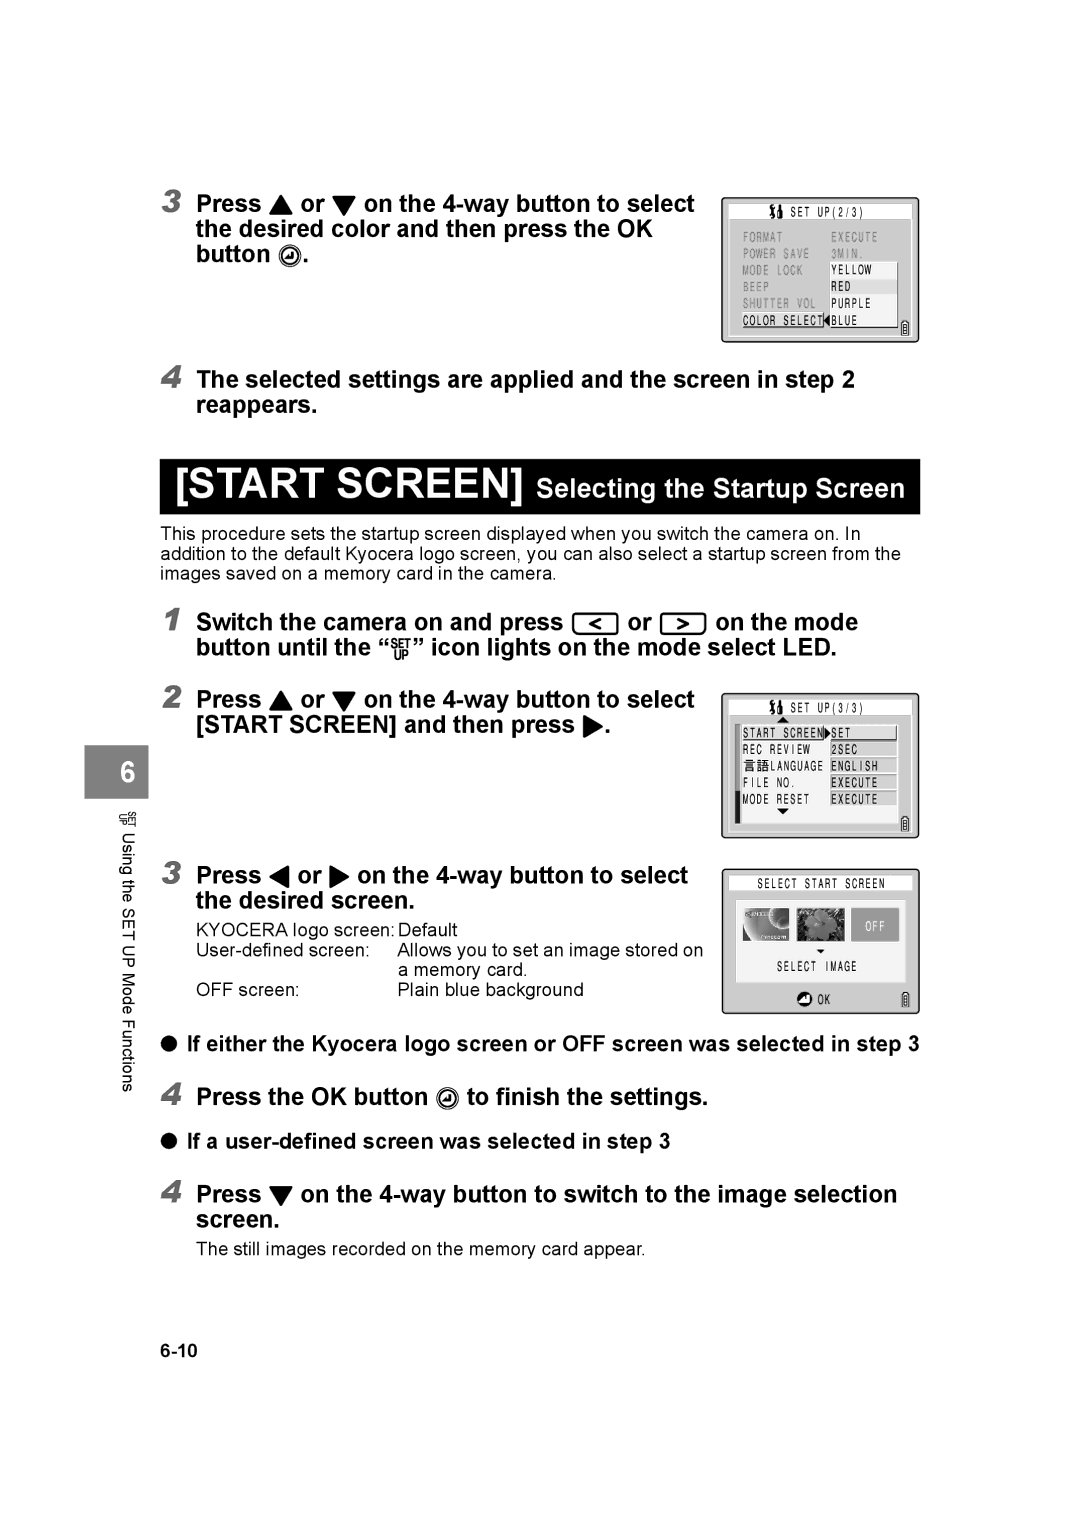 Kyocera SL300R manual Start Screen Selecting the Startup Screen, Press the OK button E to finish the settings 